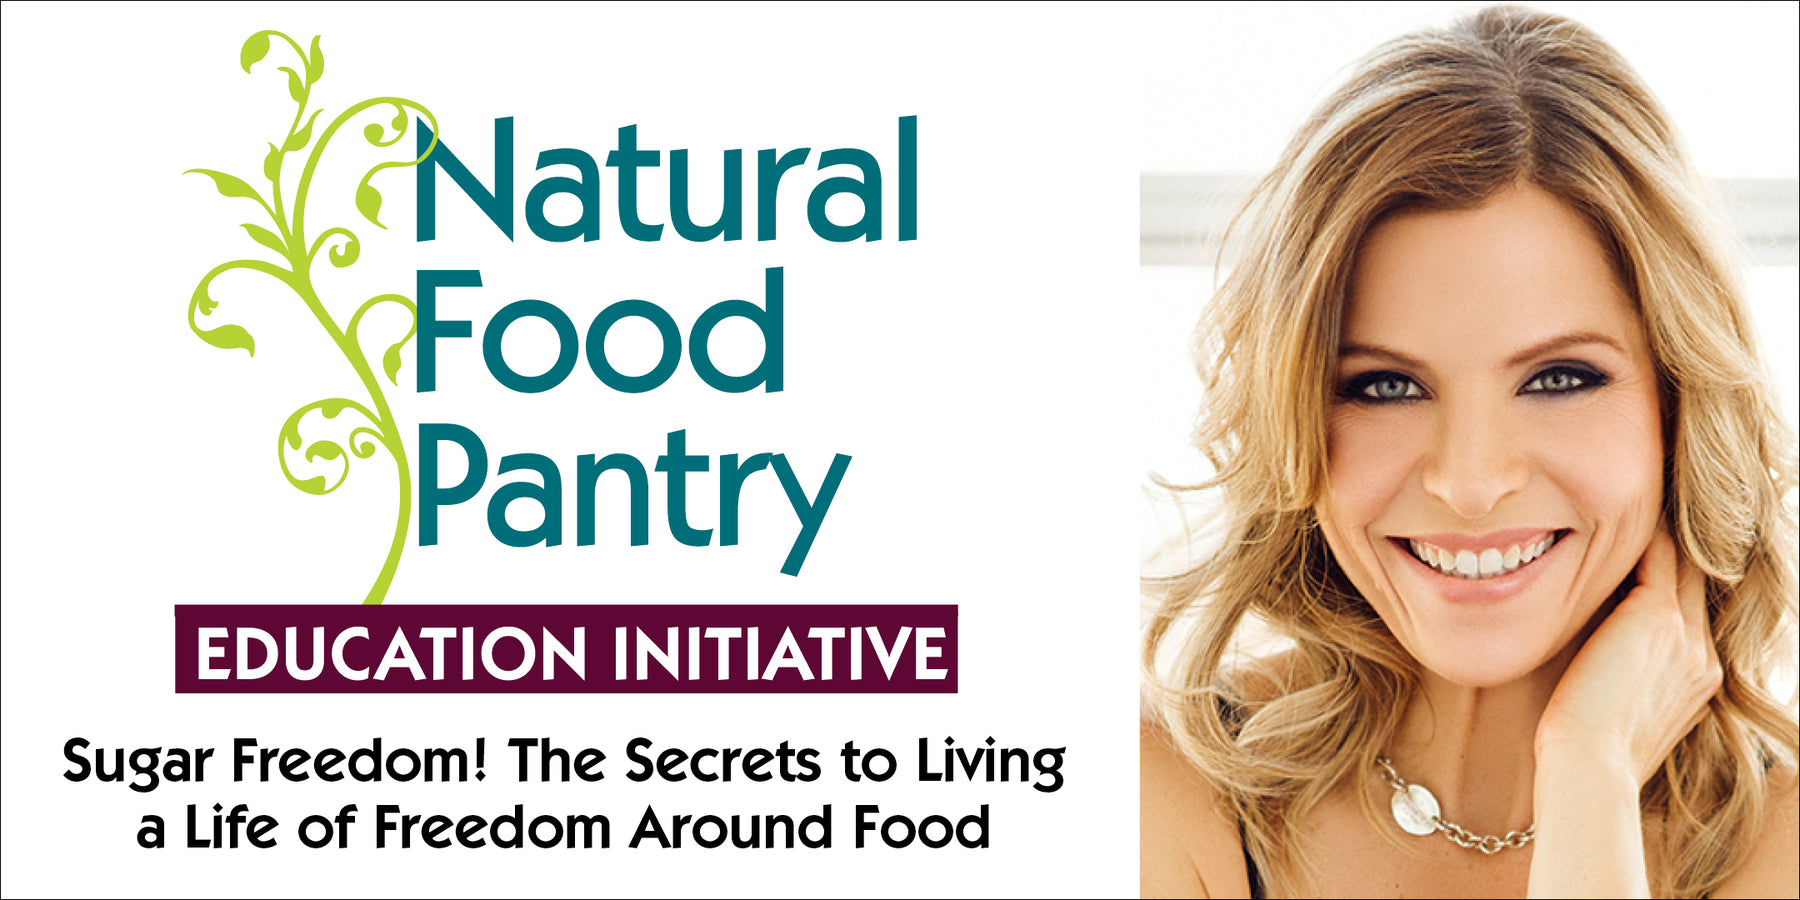 Apr 18: Sugar Freedom! The Secrets to living a life of freedom around food